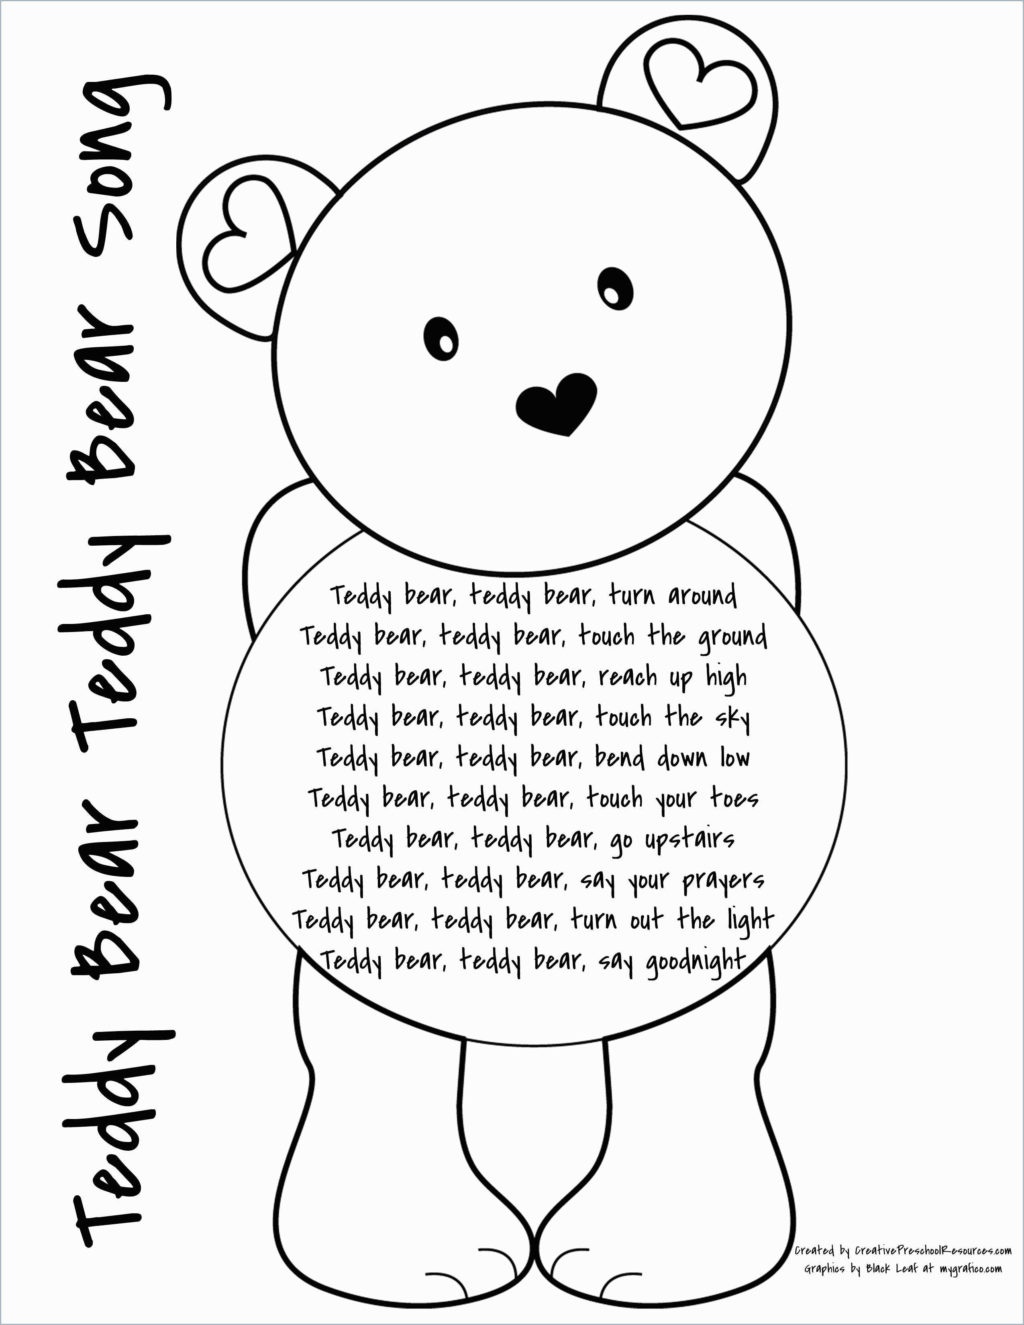 Coloring Book World ~ Teddy Bear Coloring Pages Book World For Kids - Free Printable Good Touch Bad Touch Coloring Book